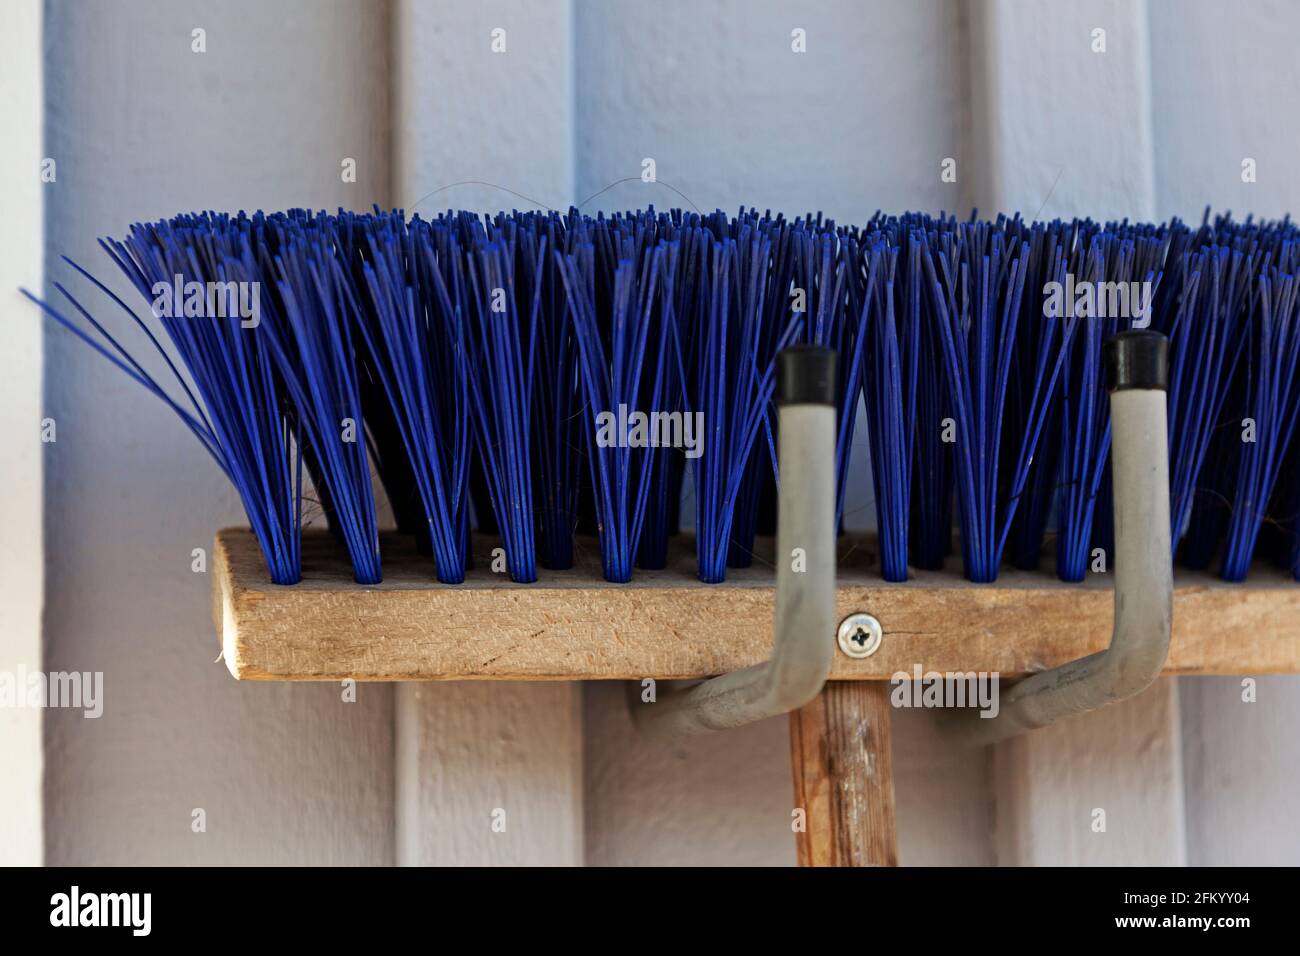 part of a blue broom hanging on a wall Stock Photo